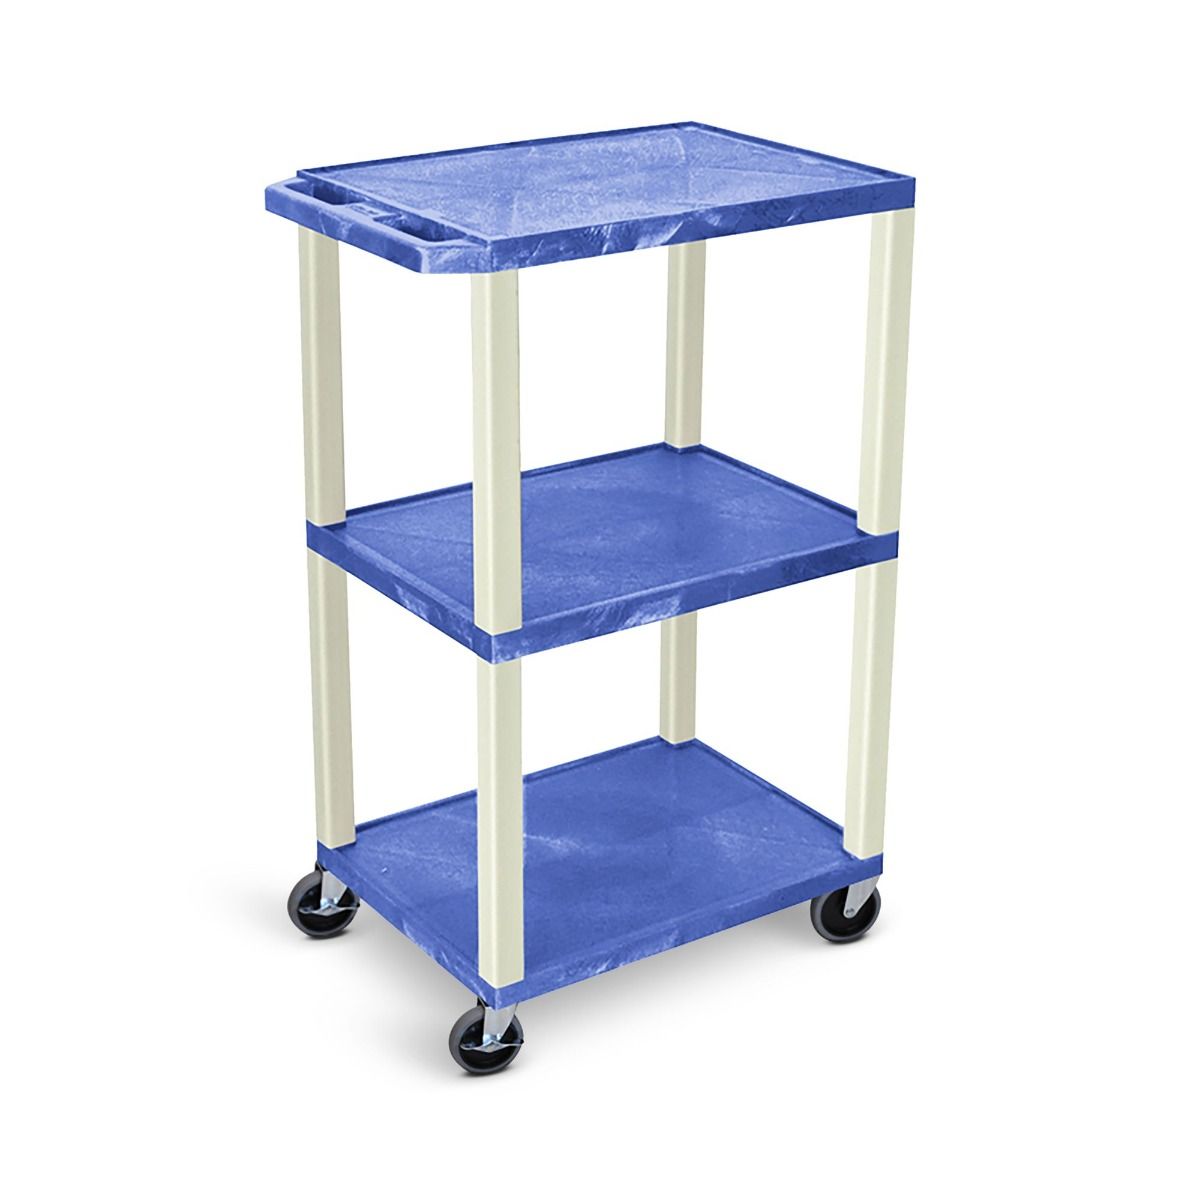 Luxor 42" High 3-Shelf Utility Cart [w/ 3-Outlet Electrical Assembly, Blue Shelves, Putty Legs]- UCPL1BUE Image 1